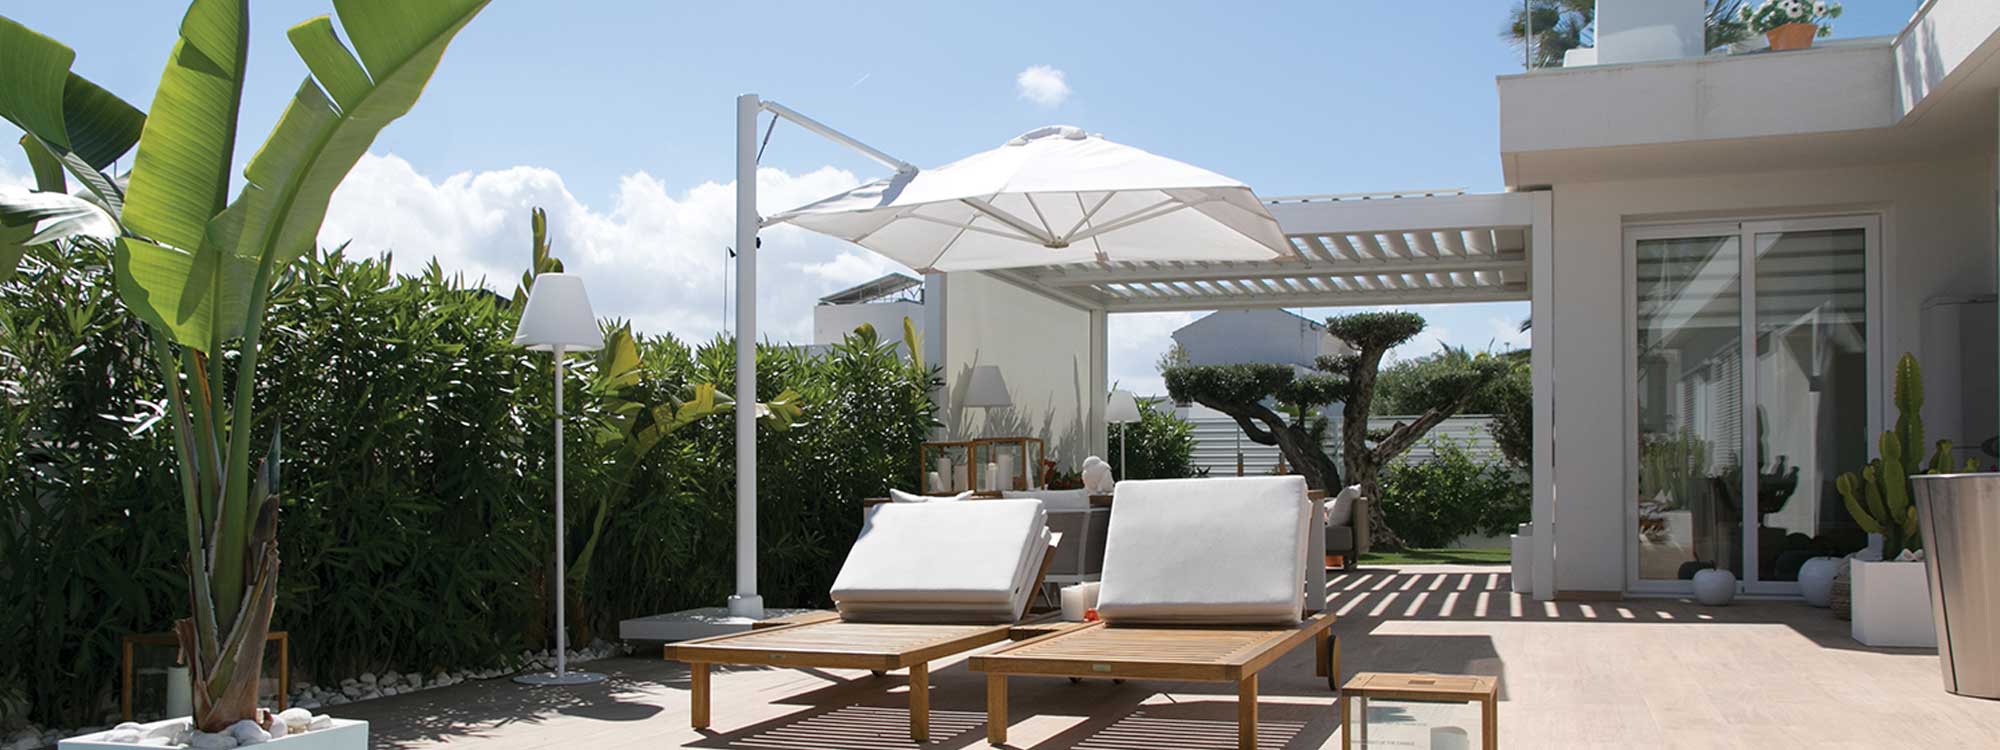 Image of Prostor P7 square white garden parasol in trendy white-washed back garden with tropical plants and 2 teak sunbeds